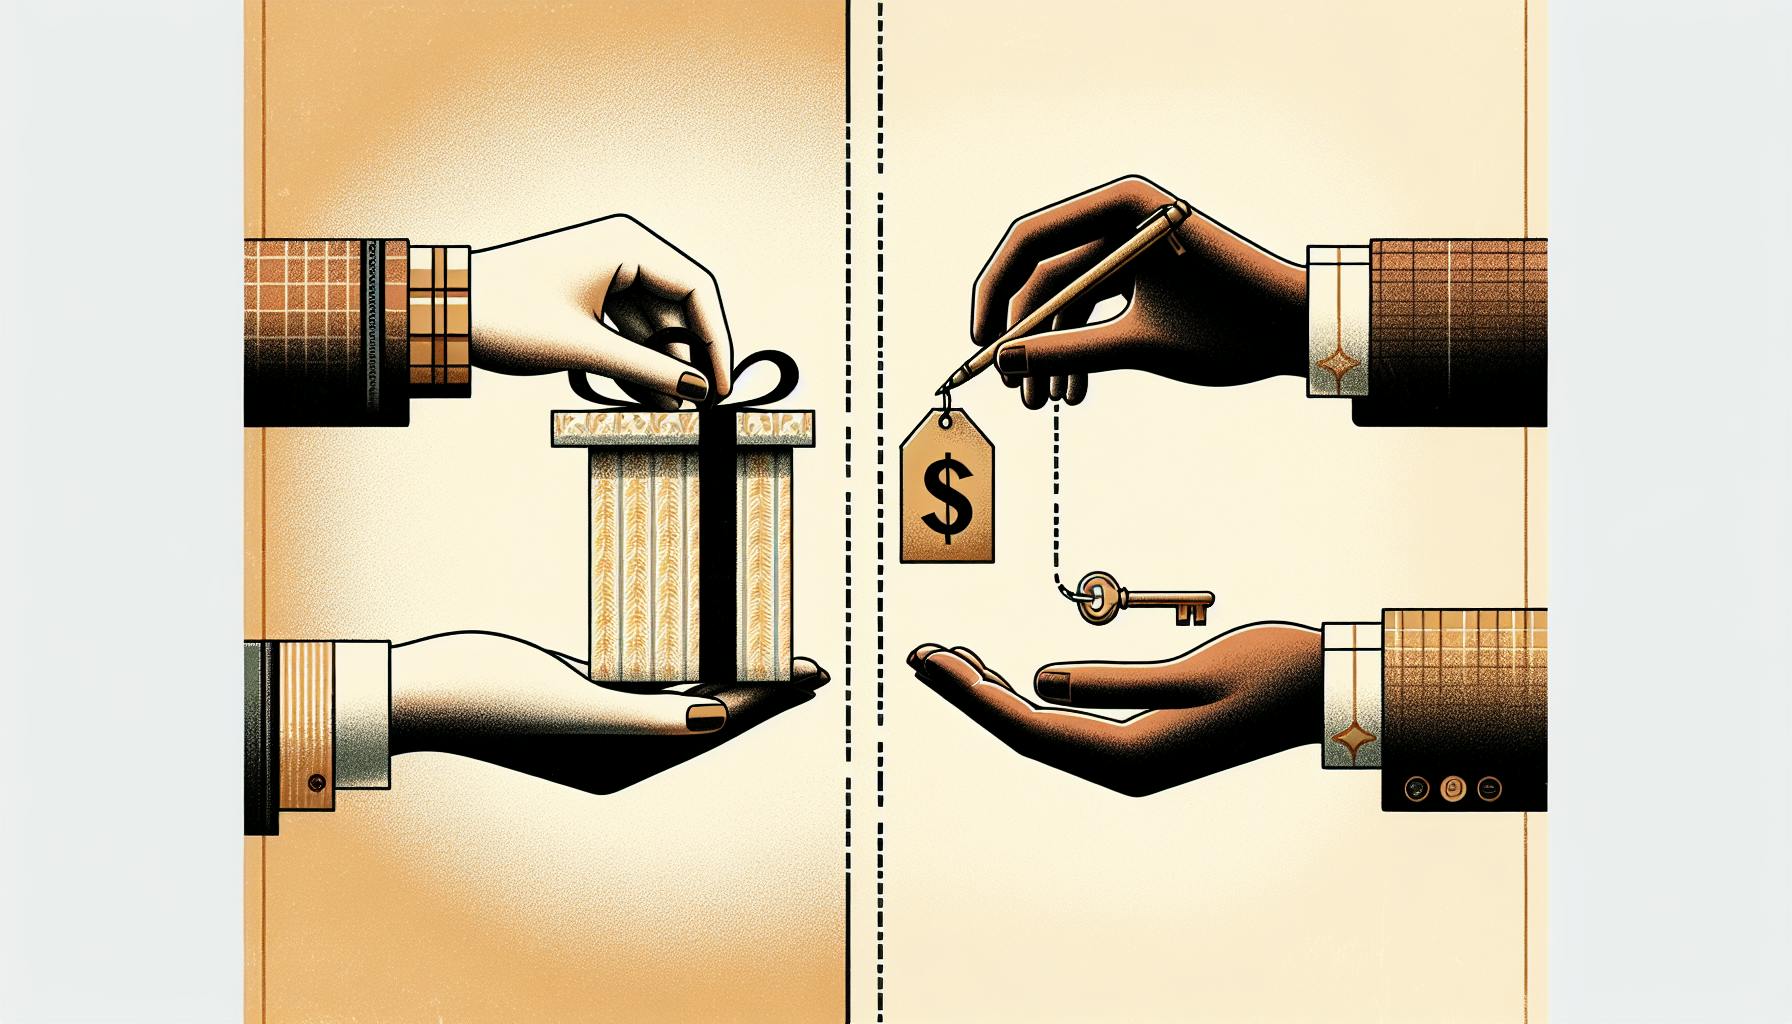 Gift vs Sale: Legal Implications of Transferring Ownership